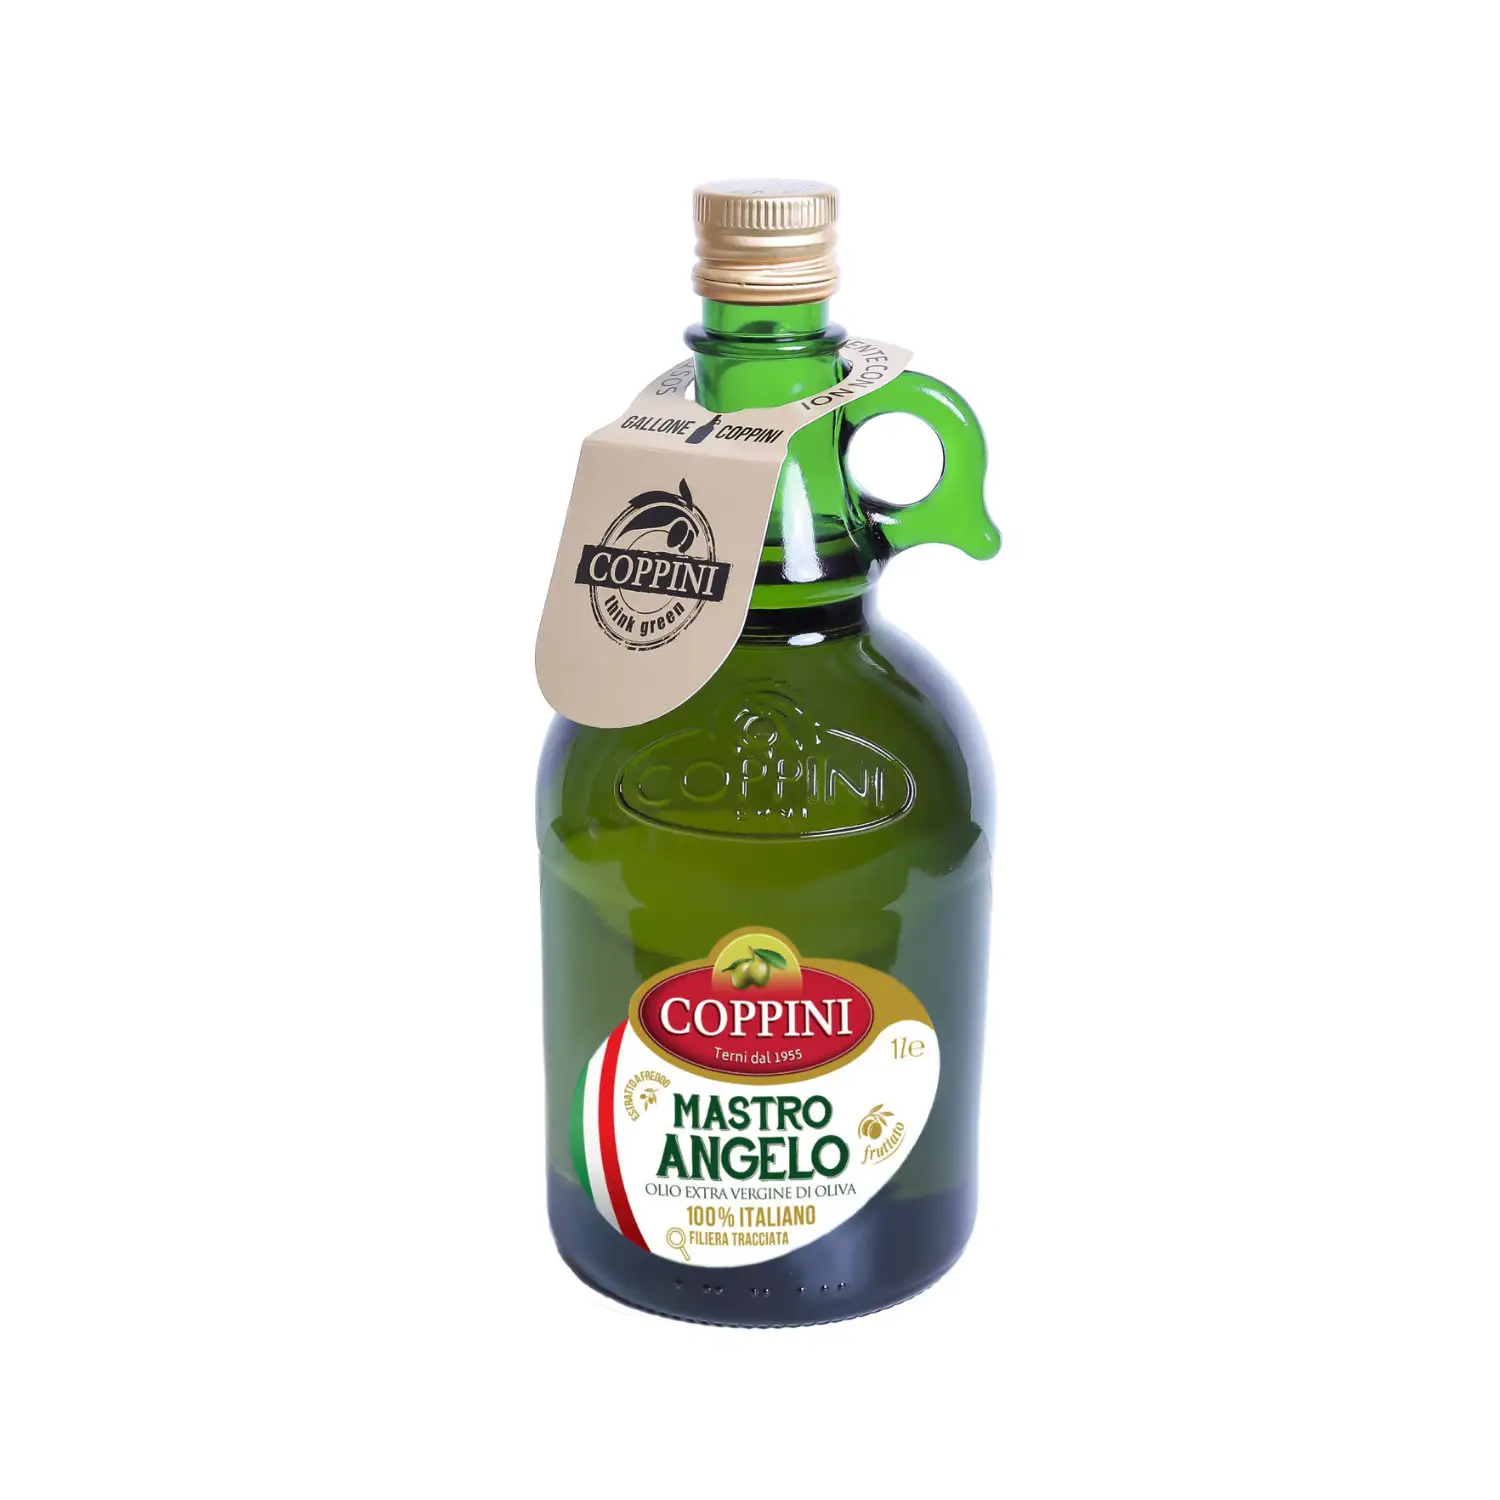 Bestseller Coppini Italian Olive Oil - 1L Glass Of Fruity Extravirgin - Youthful Flair For Your Meals